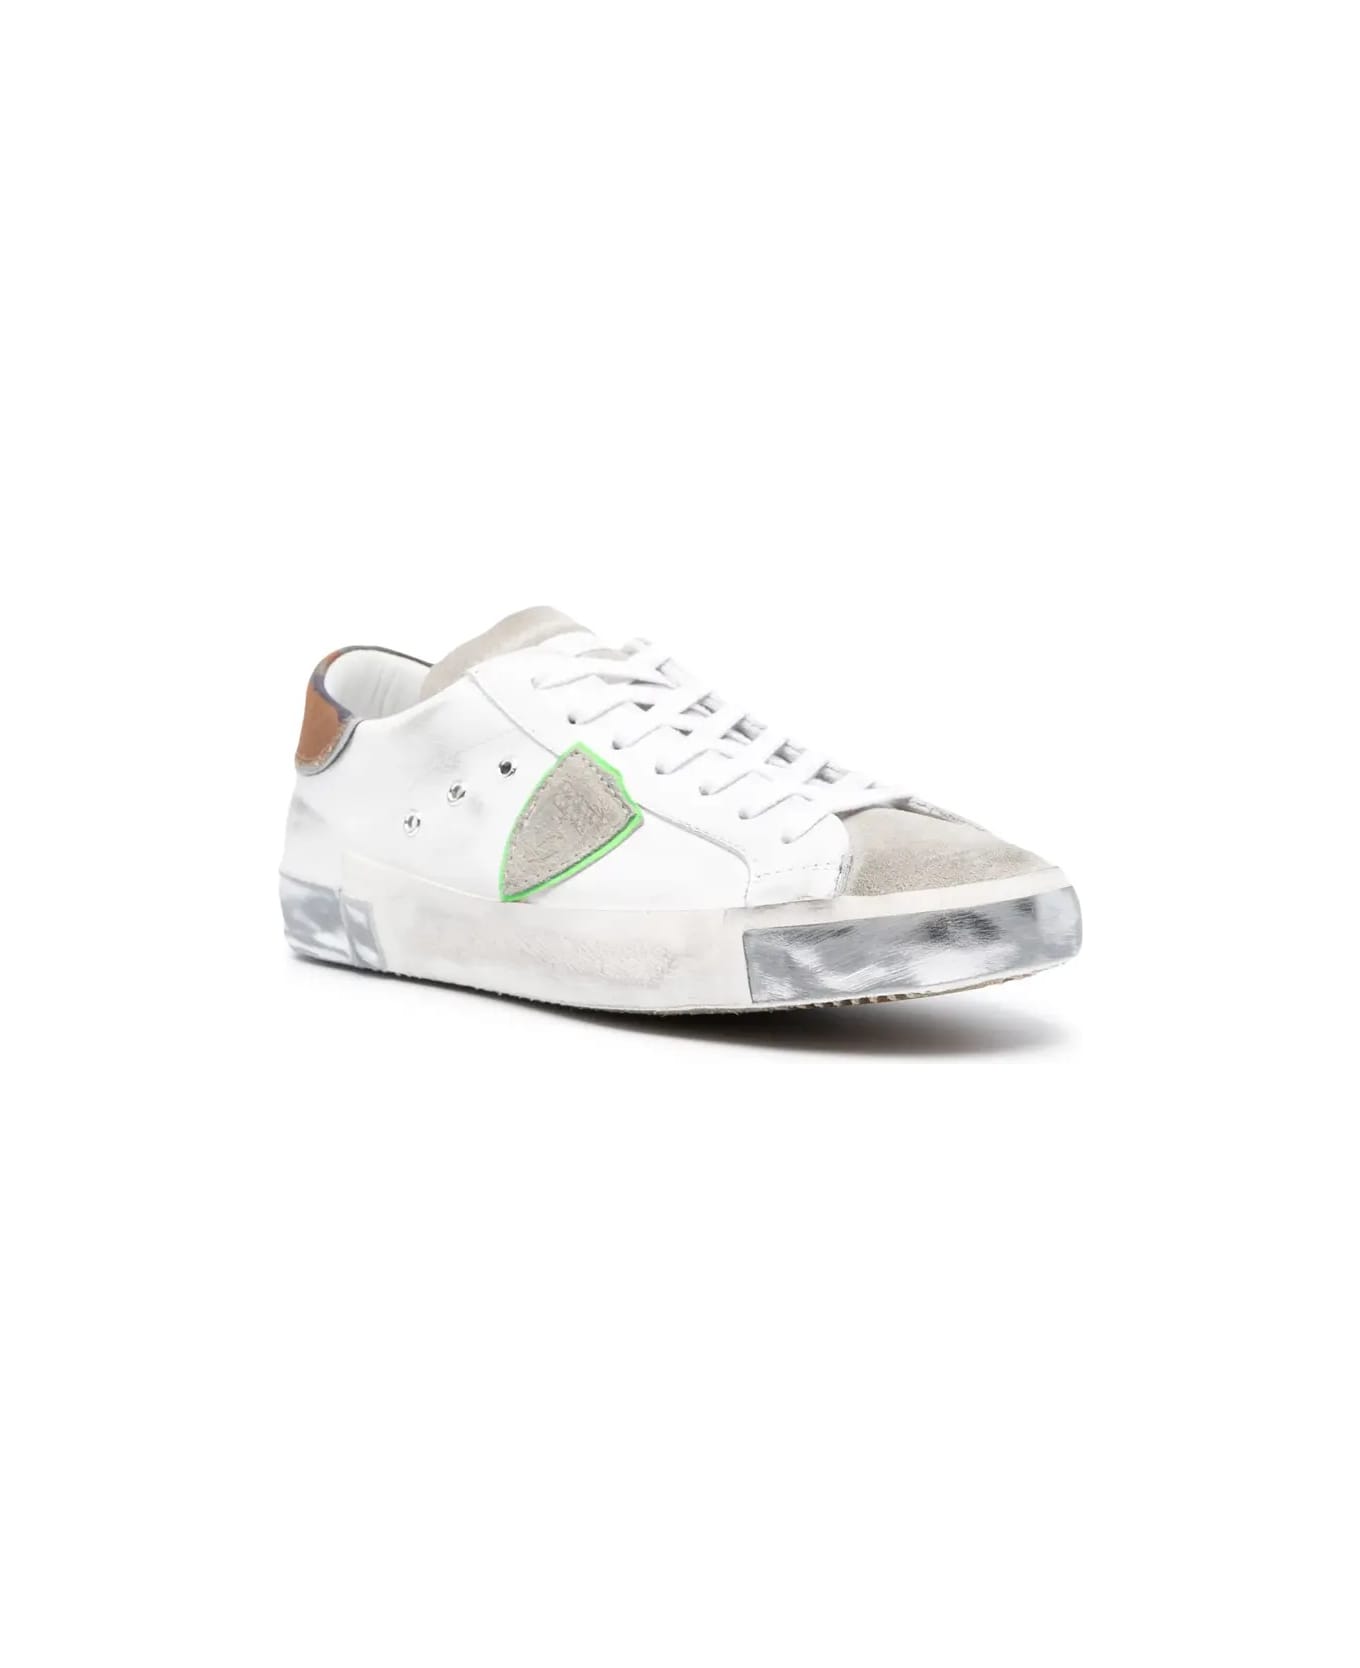 Philippe Model Prsx Low Sneakers - White And Green - White